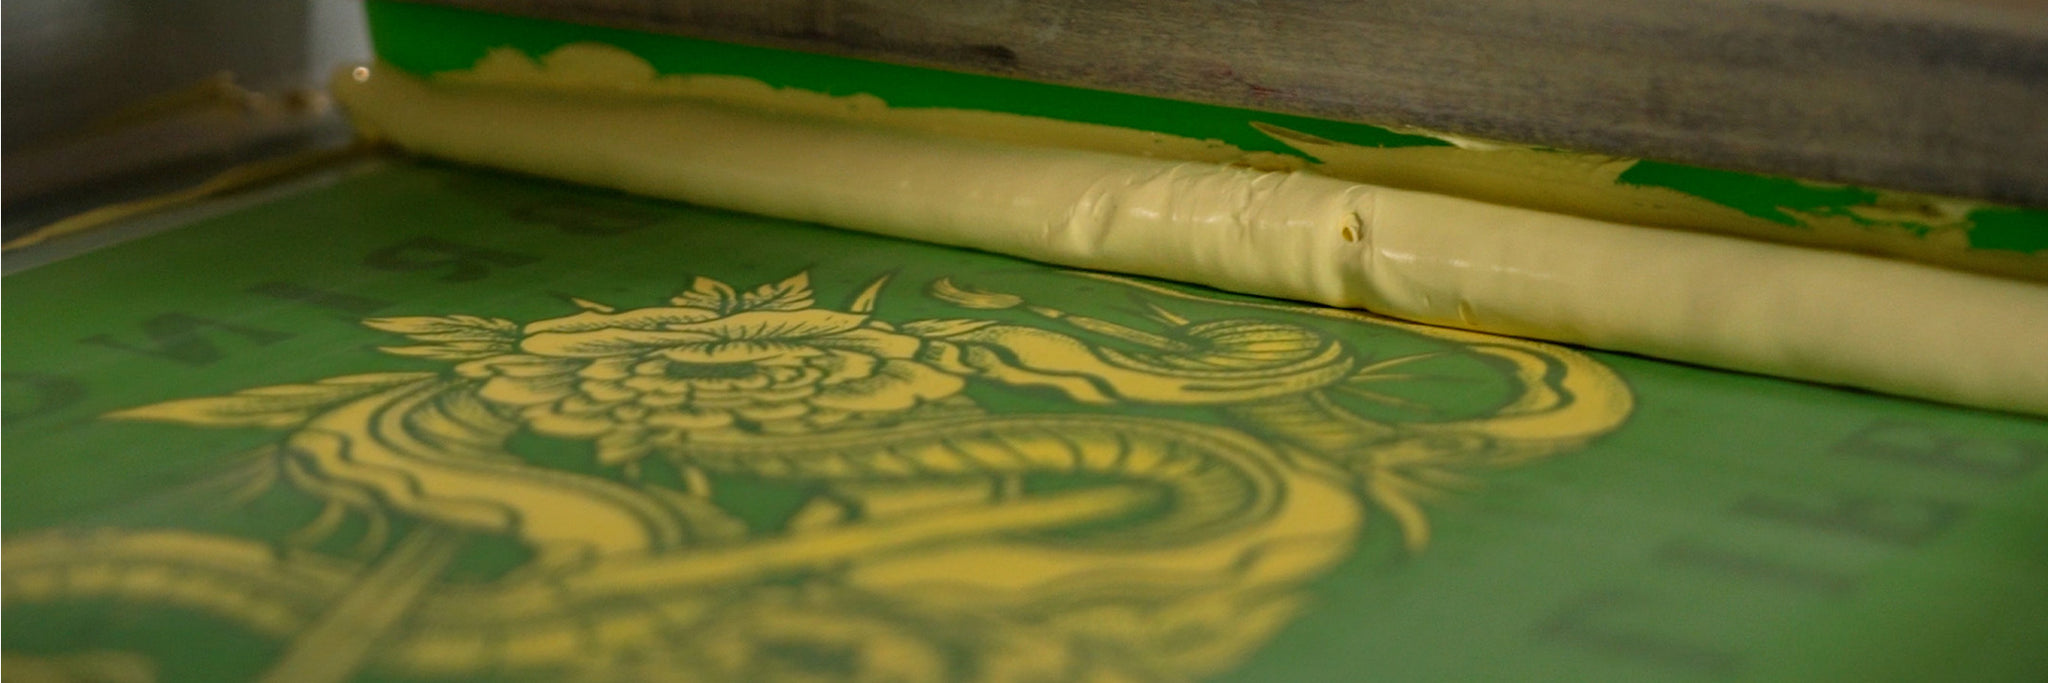 3 WAYS TO CREATE A SMOOTH SCREEN PRINT